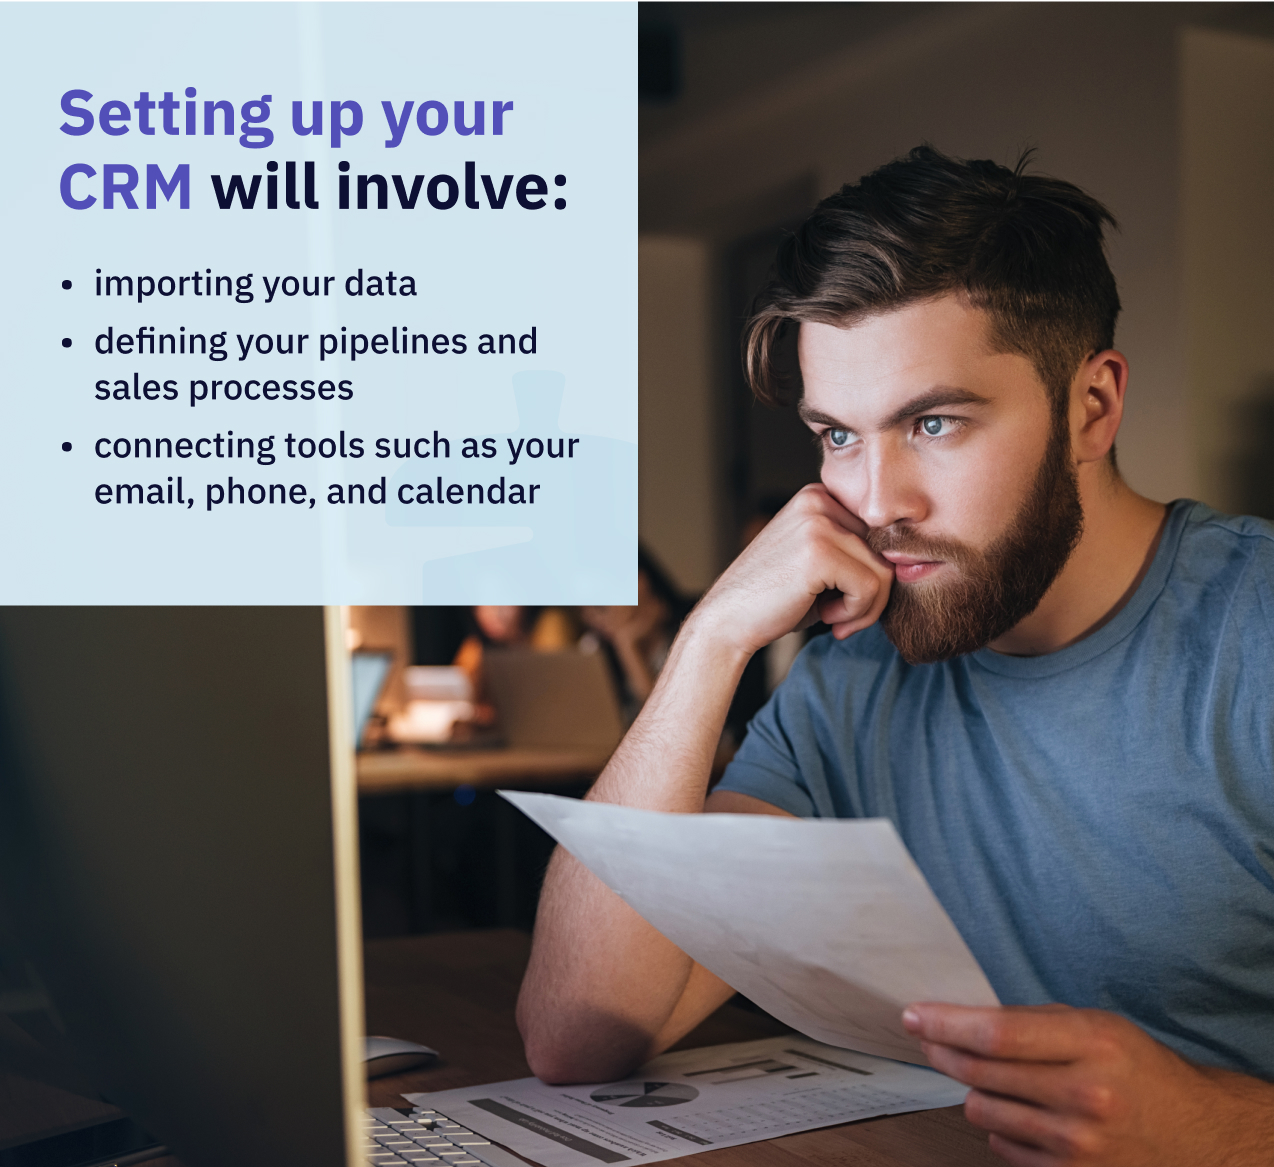 Steps for setting up your CRM